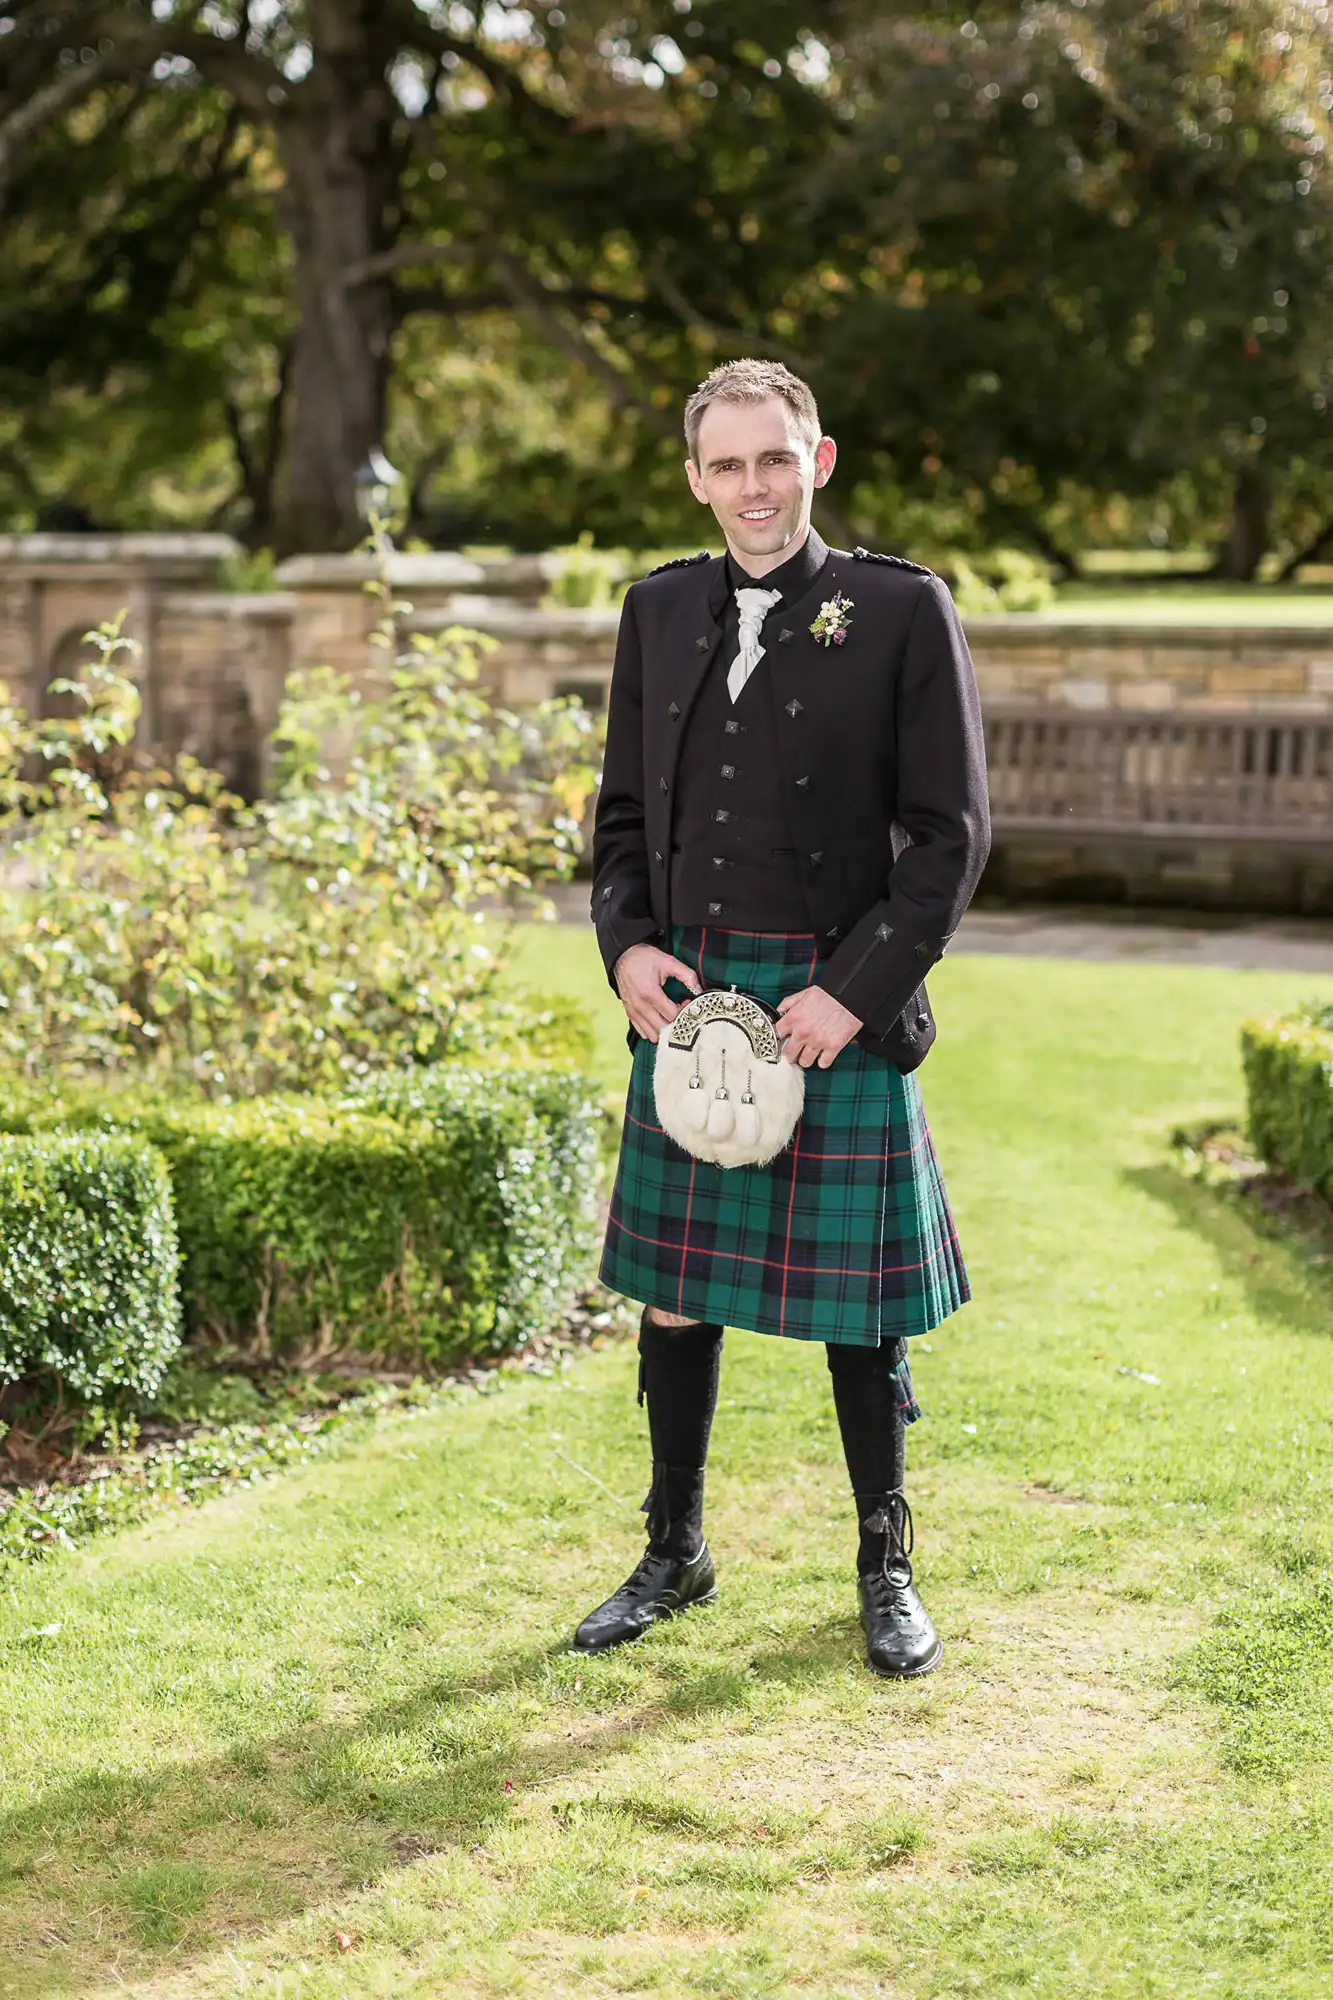 A man in a traditional scottish kilt and jacket smiling in a garden setting, holding a sporran.